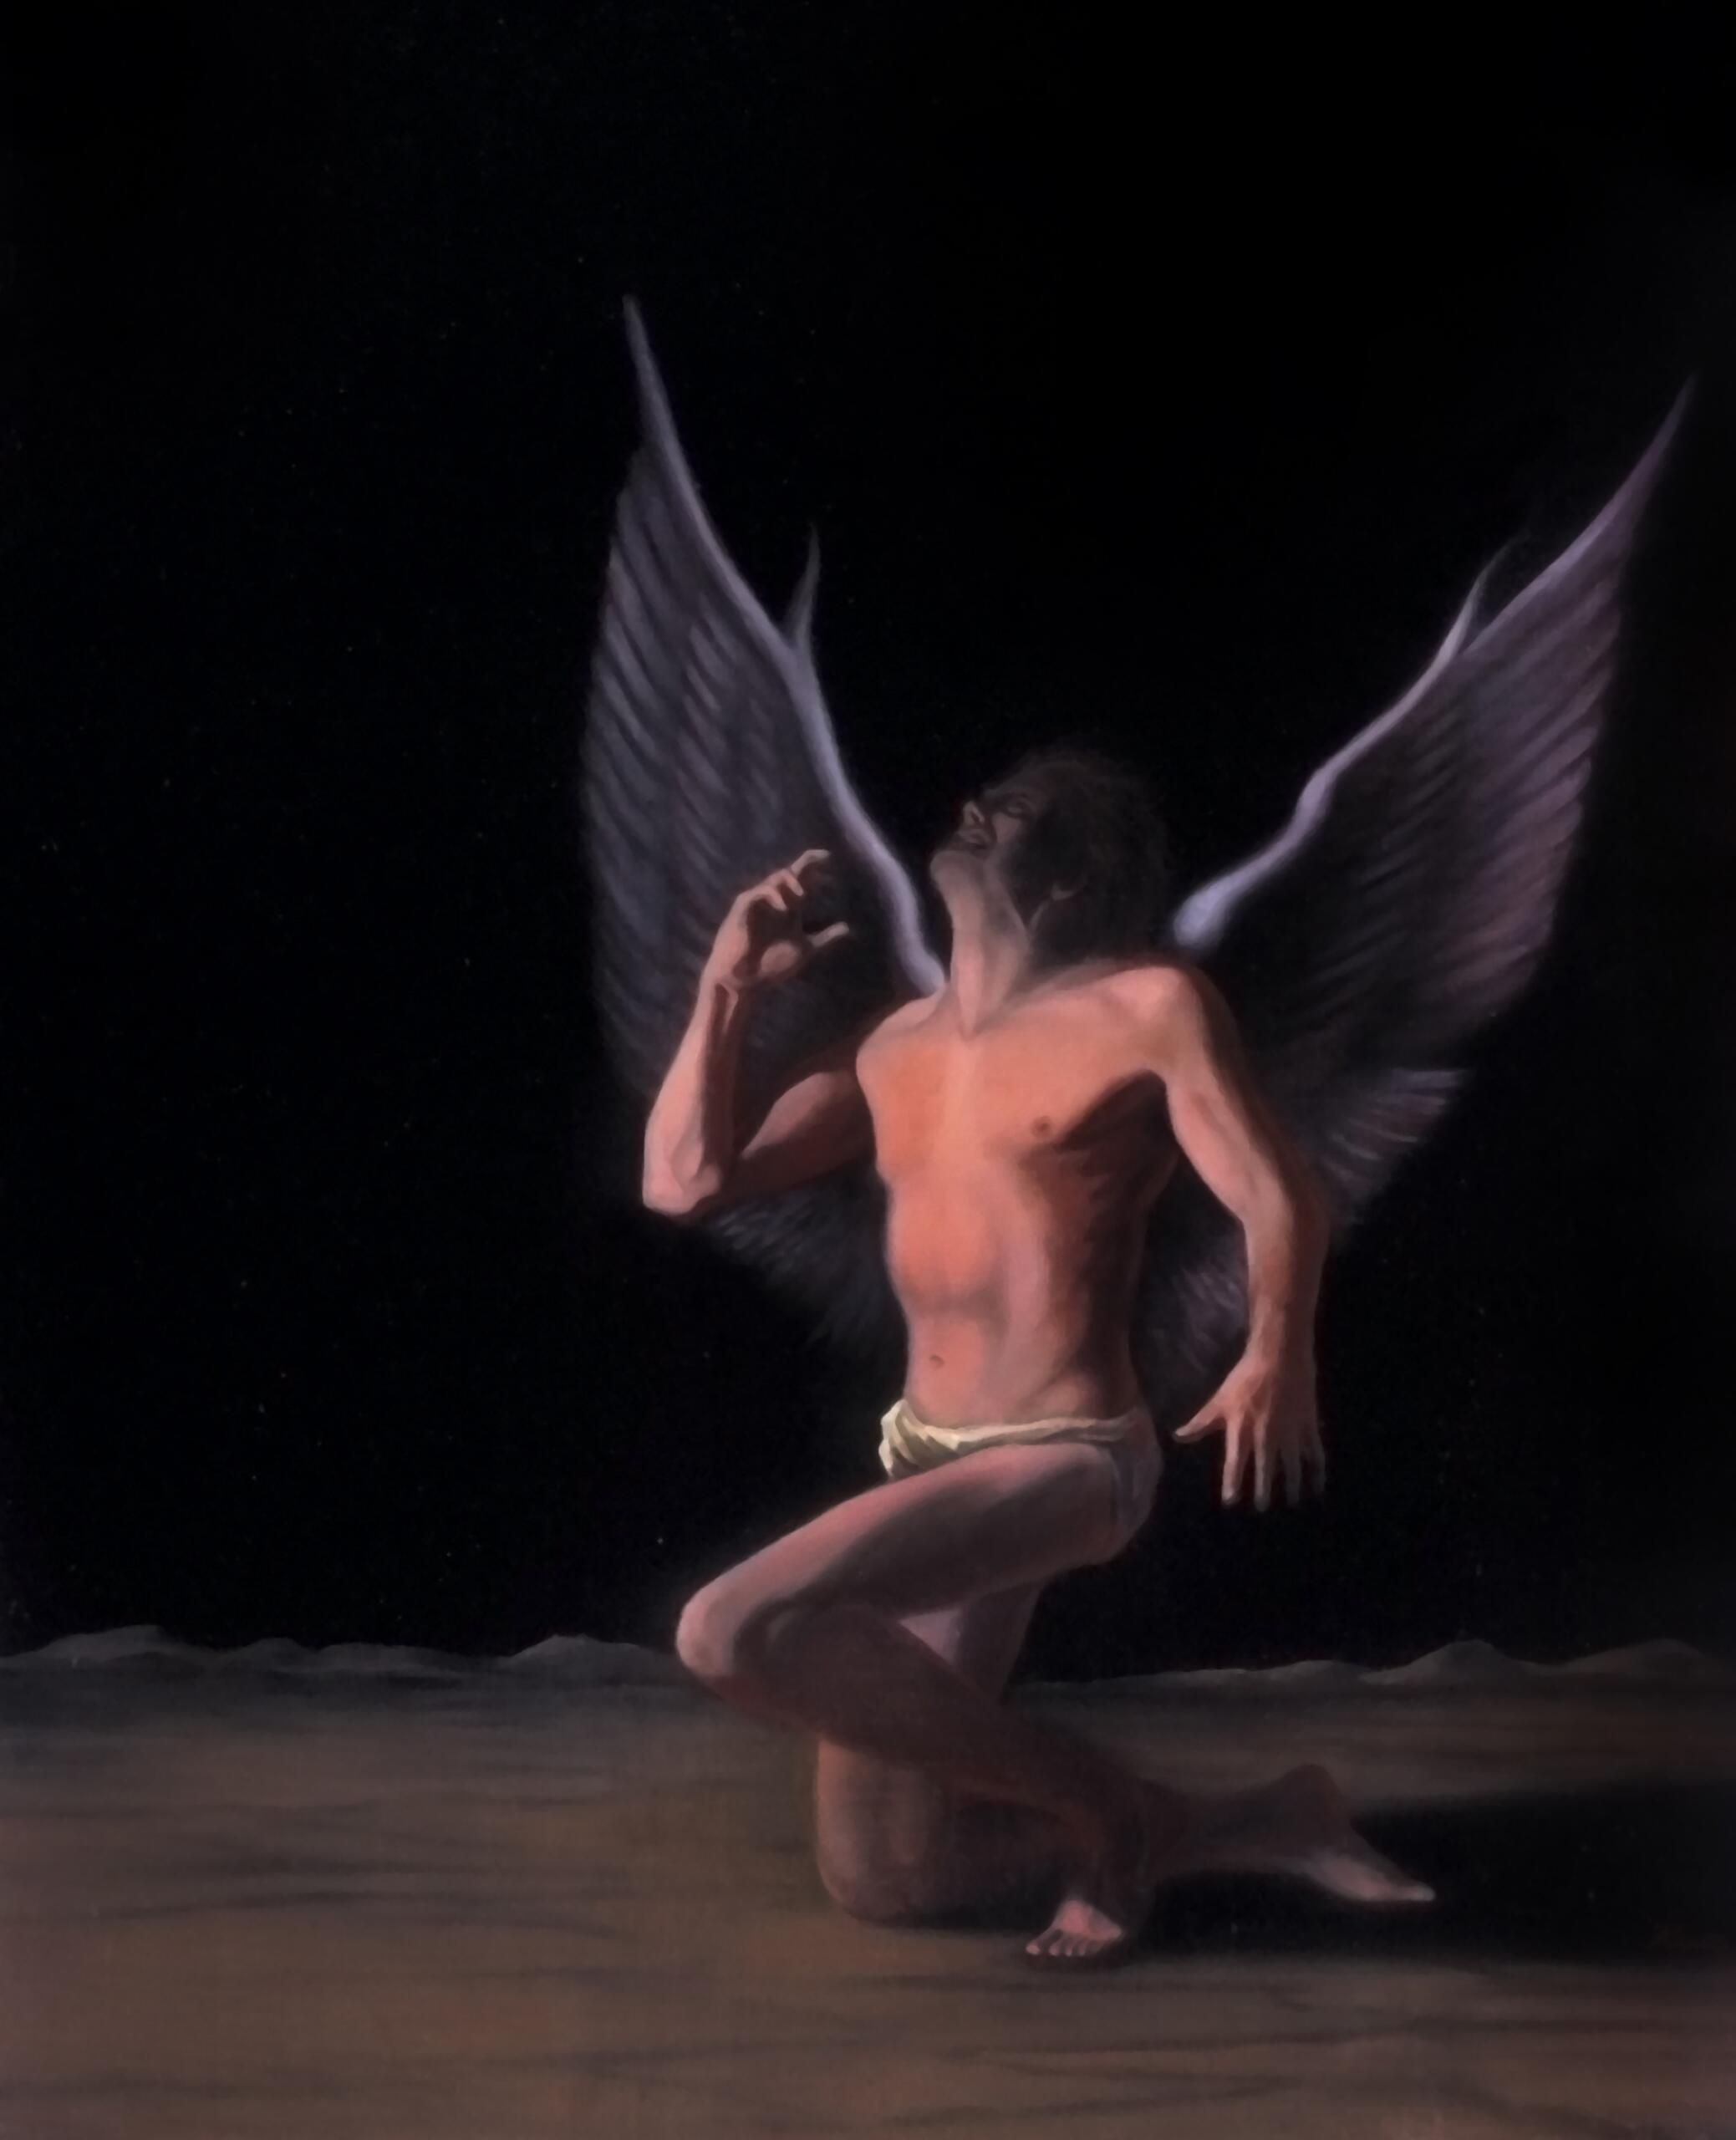 In the dark, a man with spread white wings, clothed only in fabric around his lap, kneels on the ground, his arms tensed, and his face pointed up un a distressed expression.